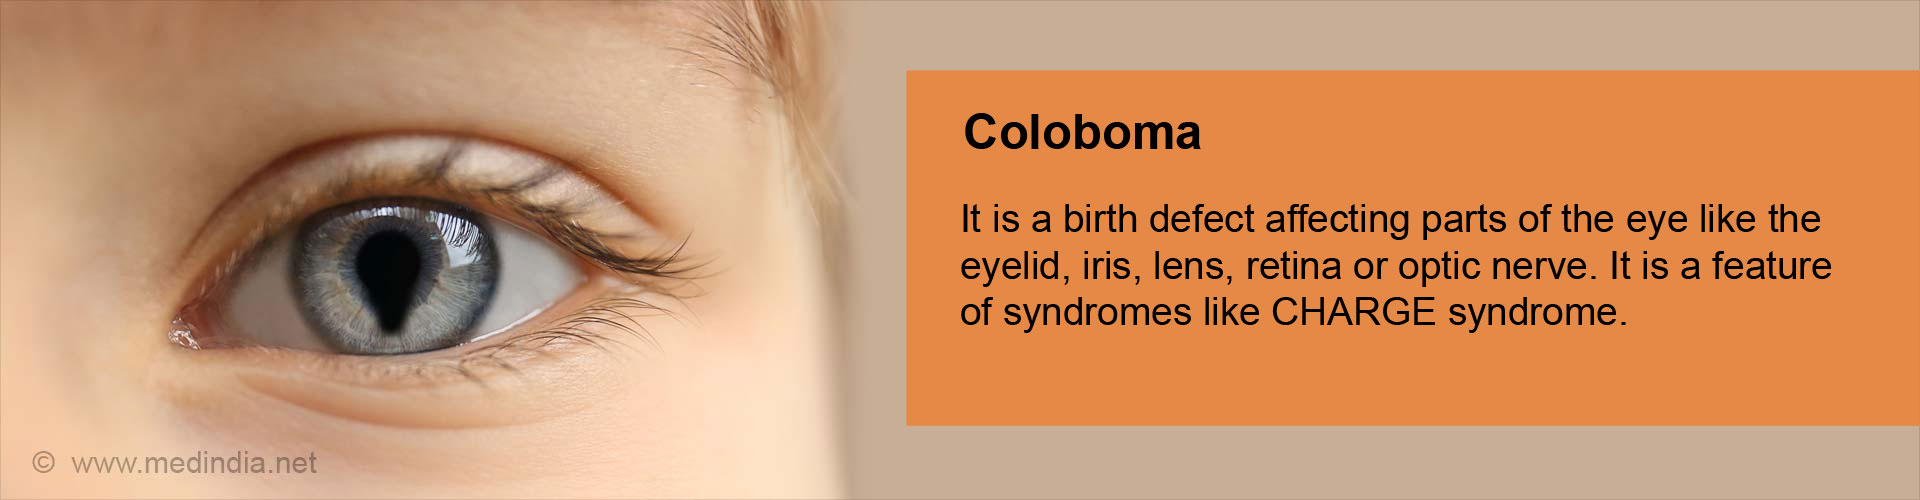 Image result for coloboma